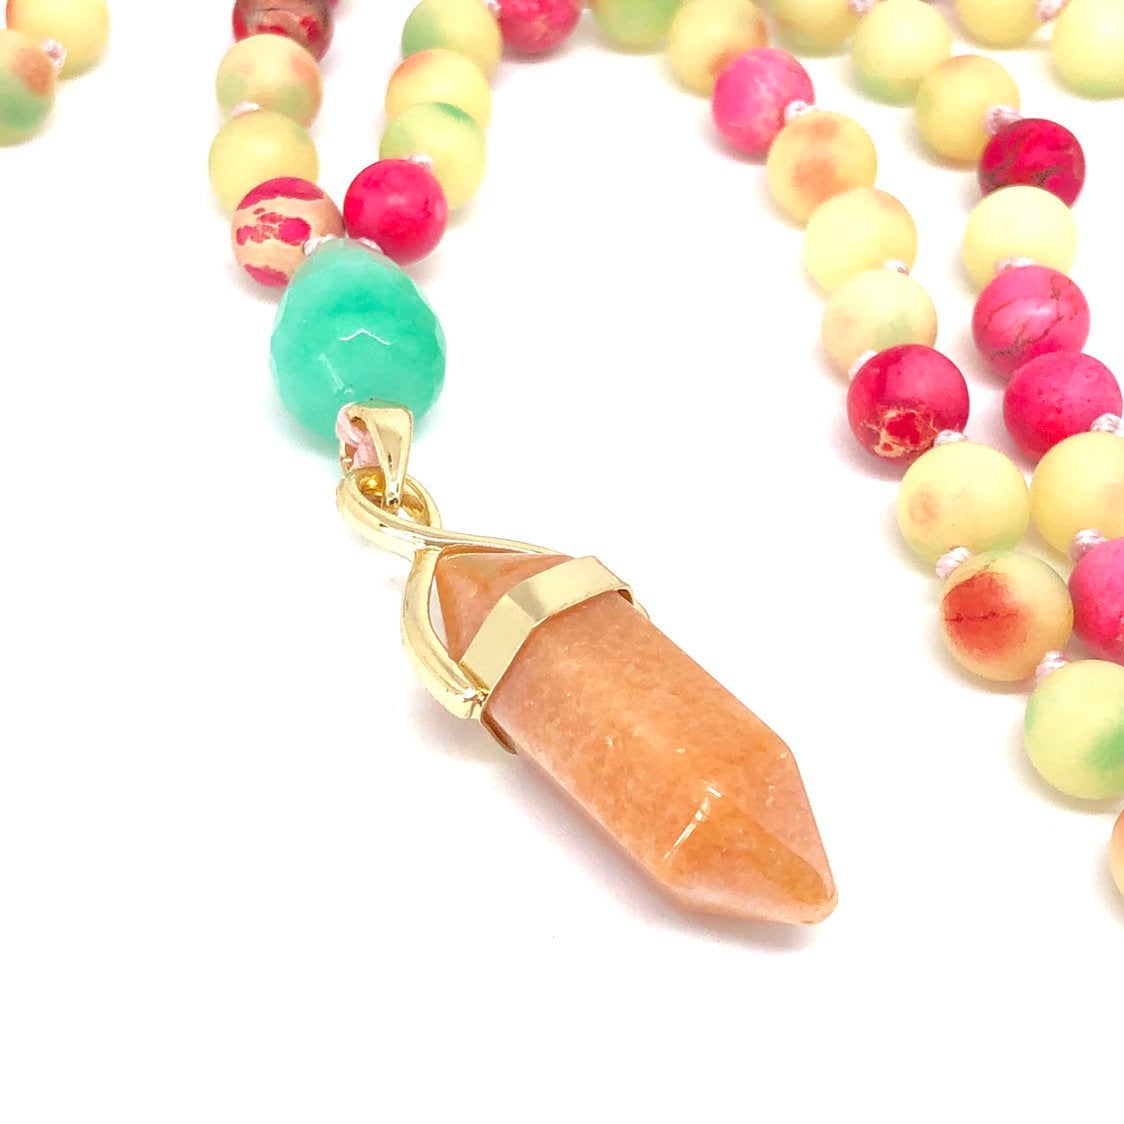 Imperial Jasper + Quartzite 108 Bead Pink and Green Mala Necklace